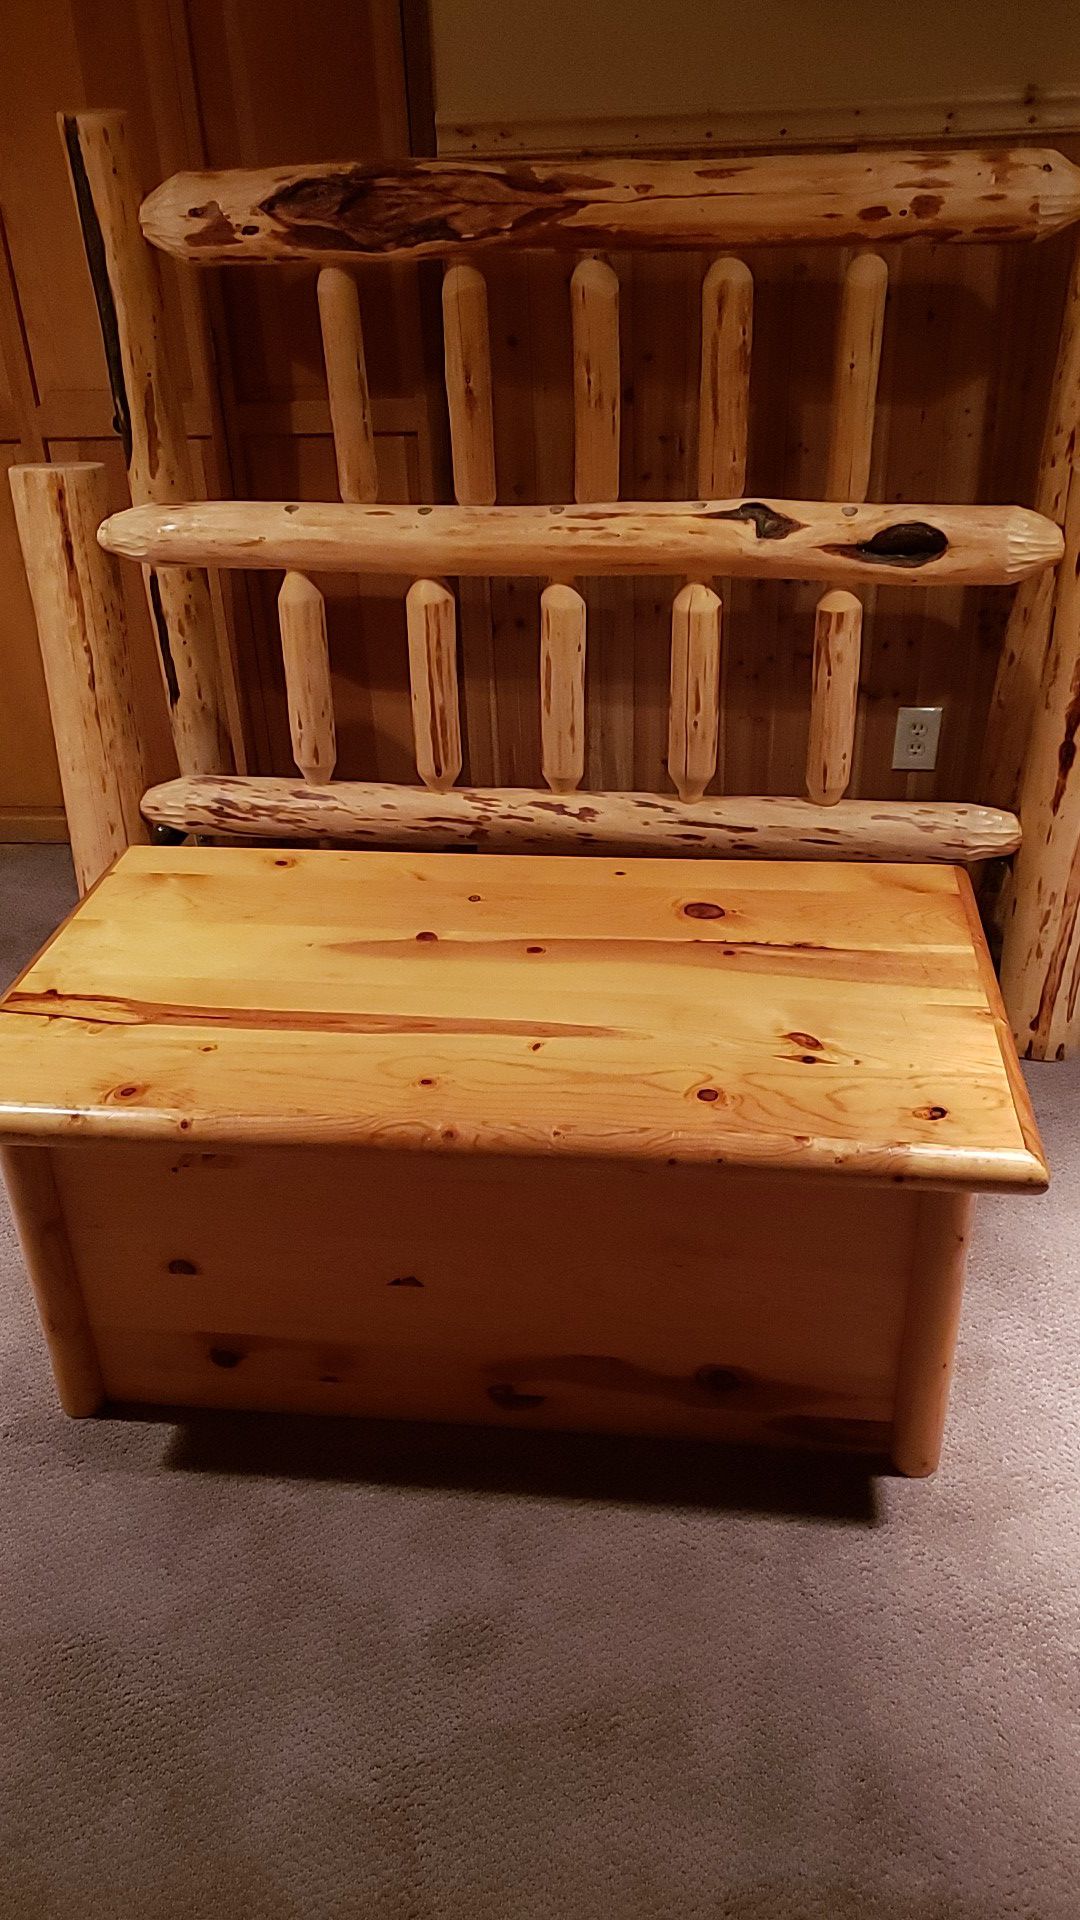 Log bed and storage chest